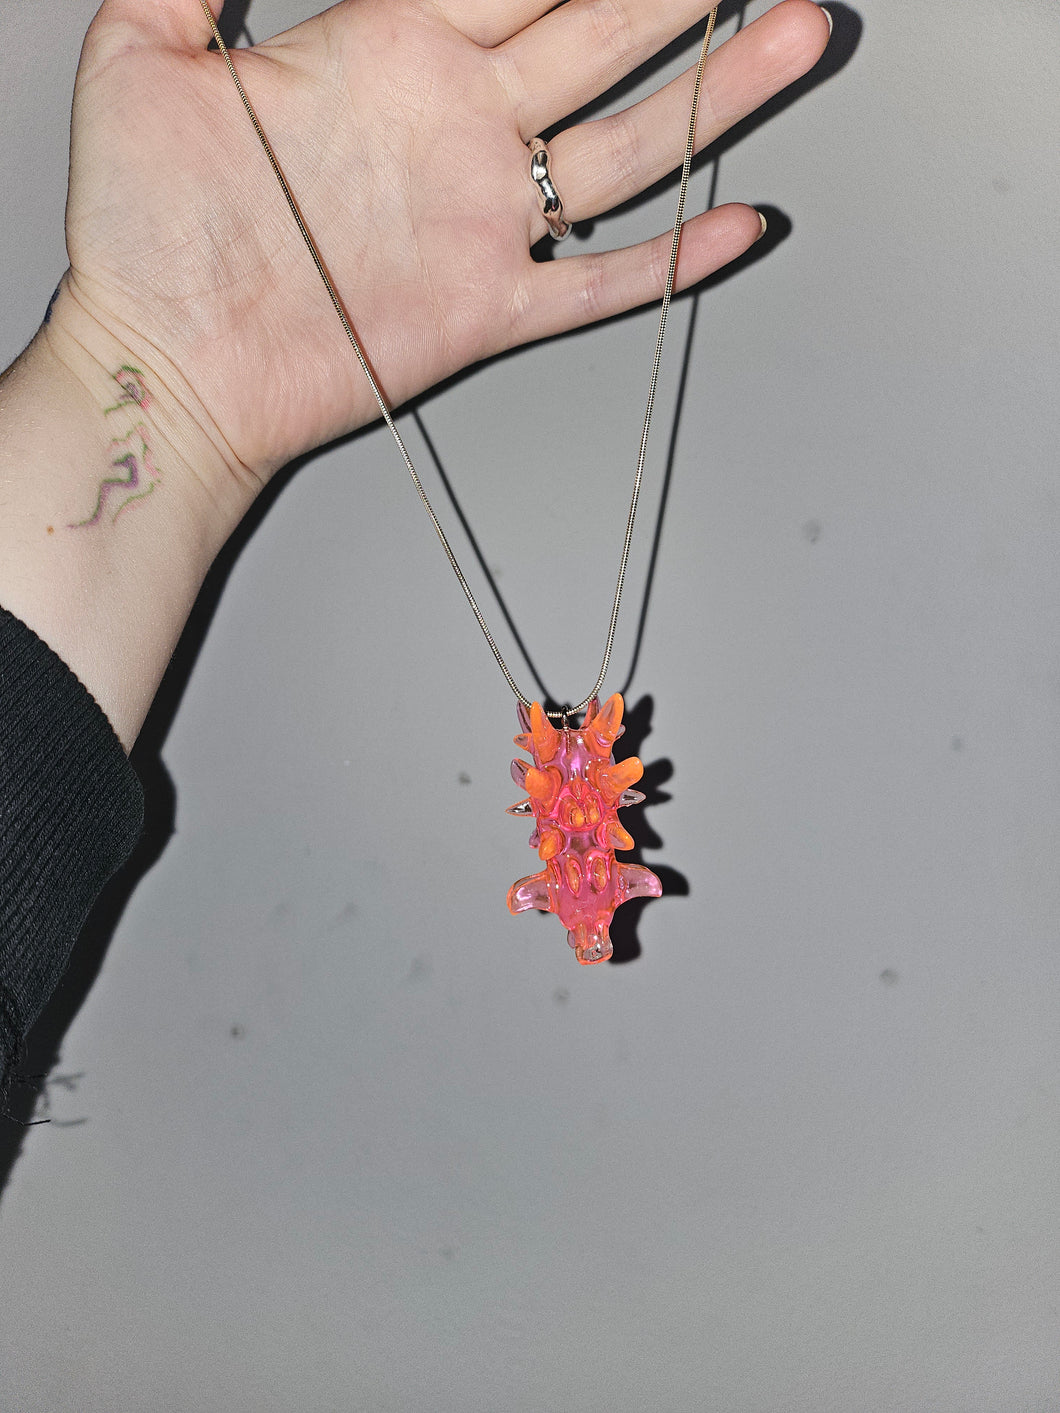 Life Form Necklaces